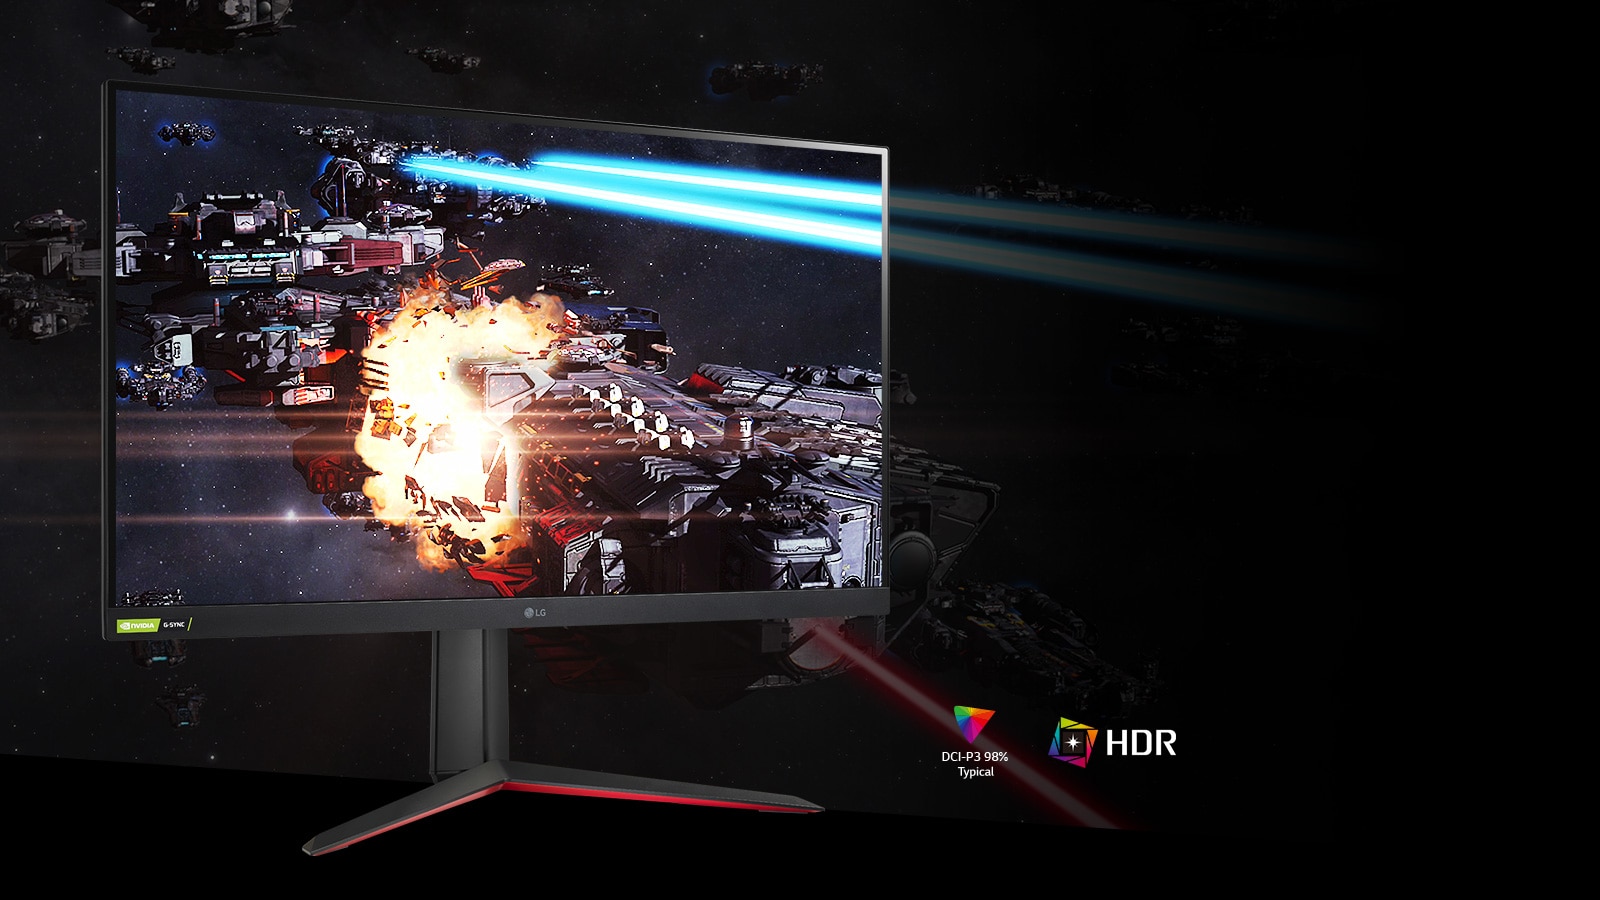 The Gaming Scene in Rich Colors and Contrast on The Monitor Supporting Hdr10 With DCI-P3 98% (Typ.).